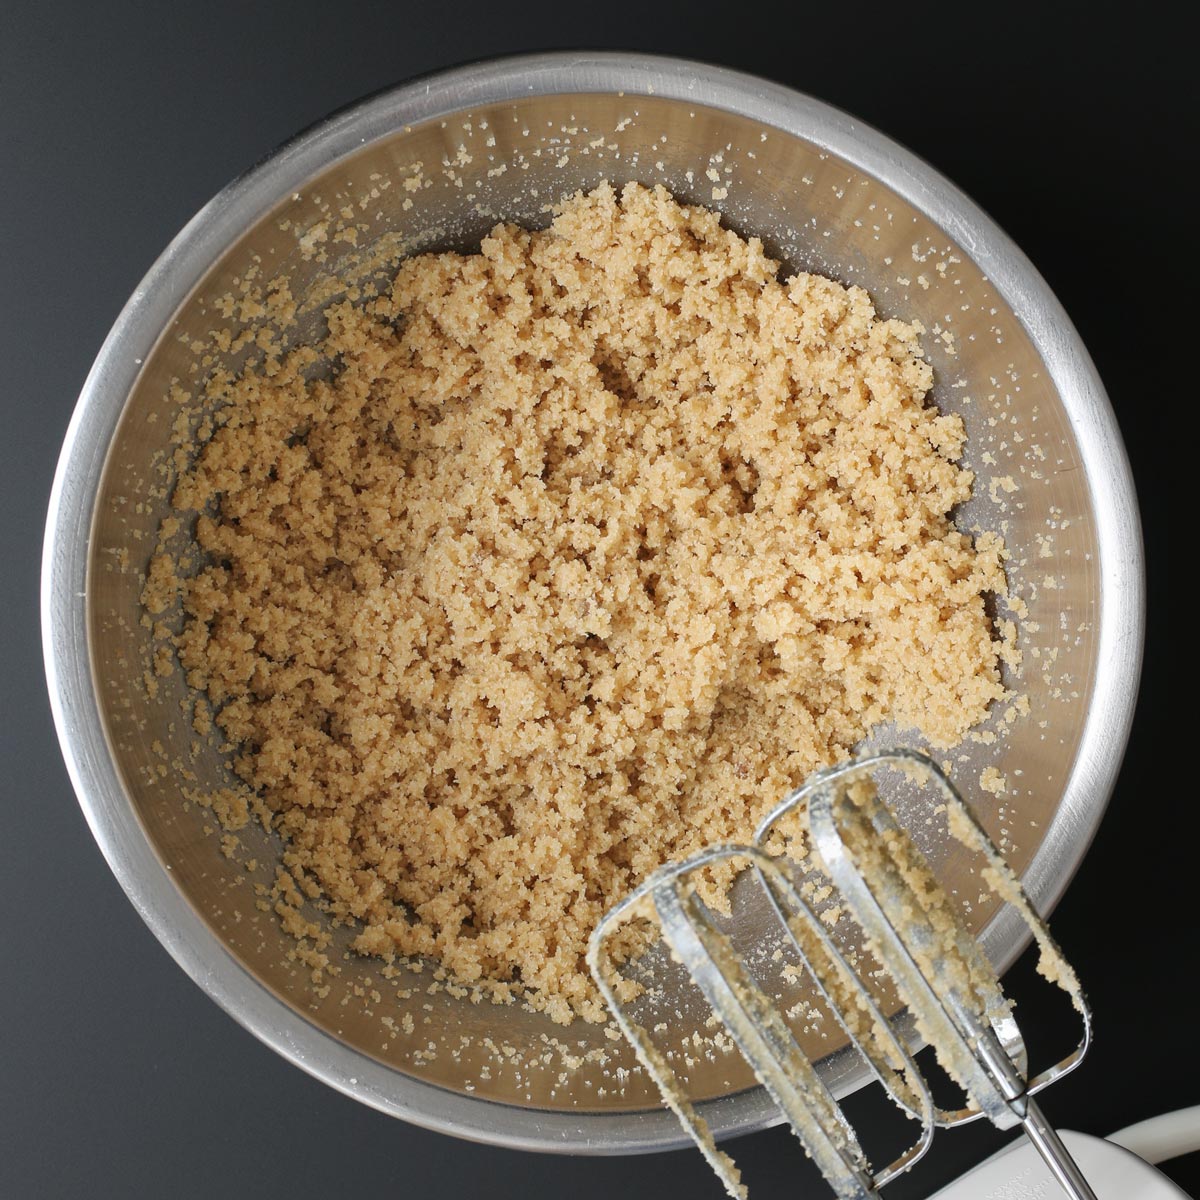 butter and sugar mixture in bowl with hand mixer to the side.